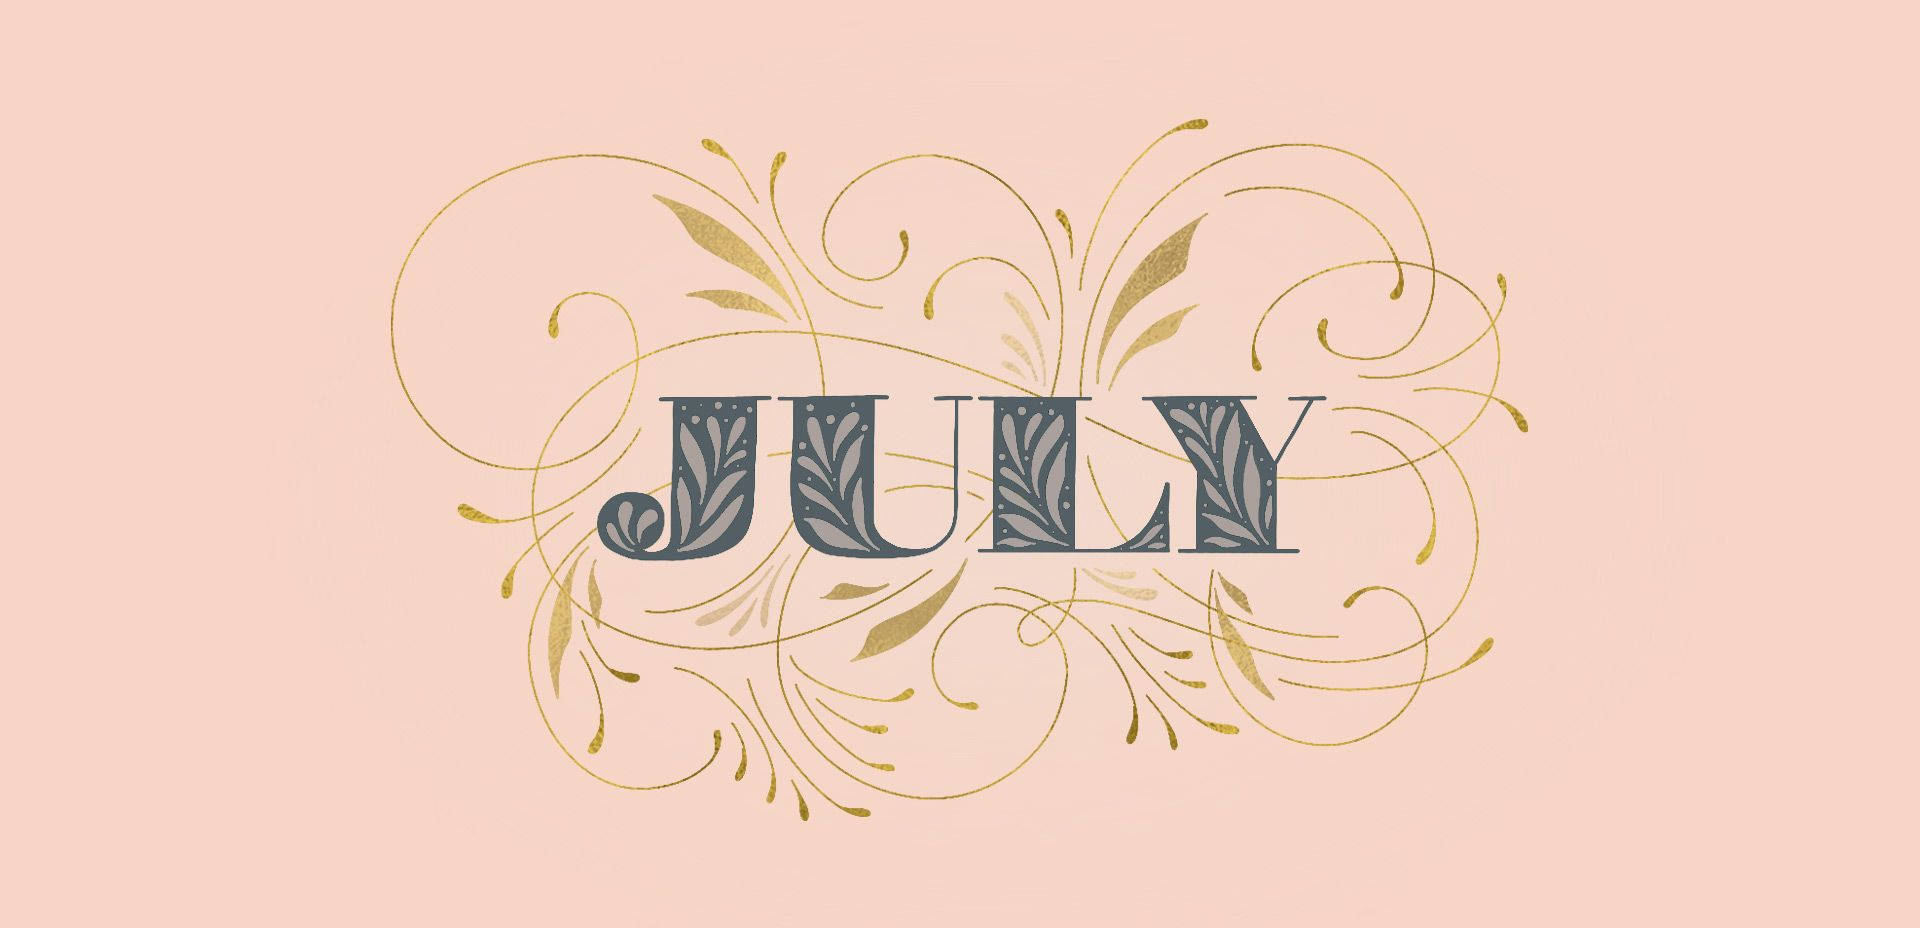 July Is Full Of Vibrant Colors And Beautiful Surprises.